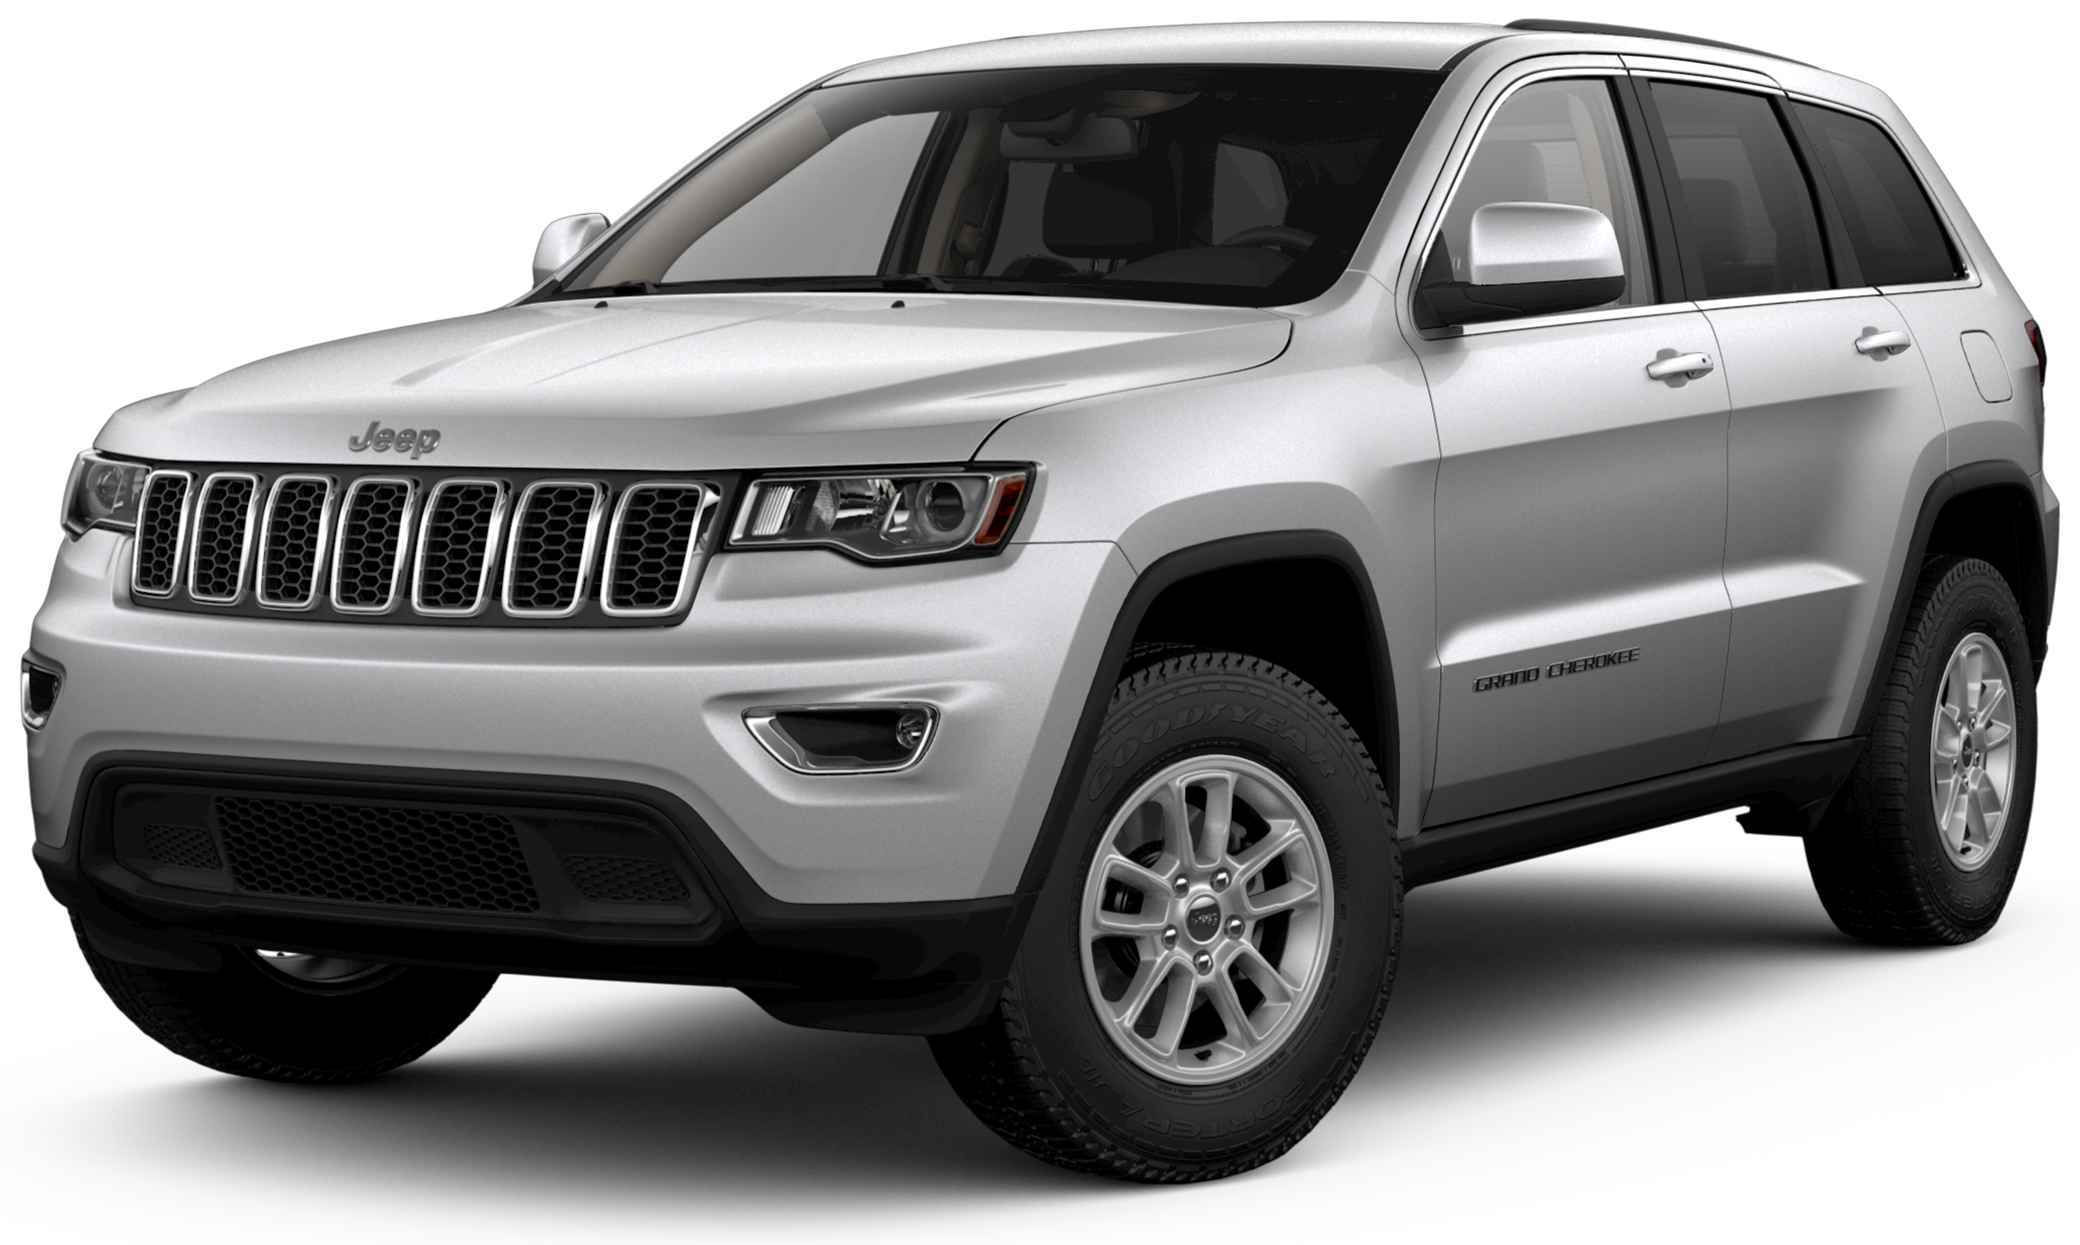 2019-jeep-grand-cherokee-incentives-specials-offers-in-wilkes-barre-pa